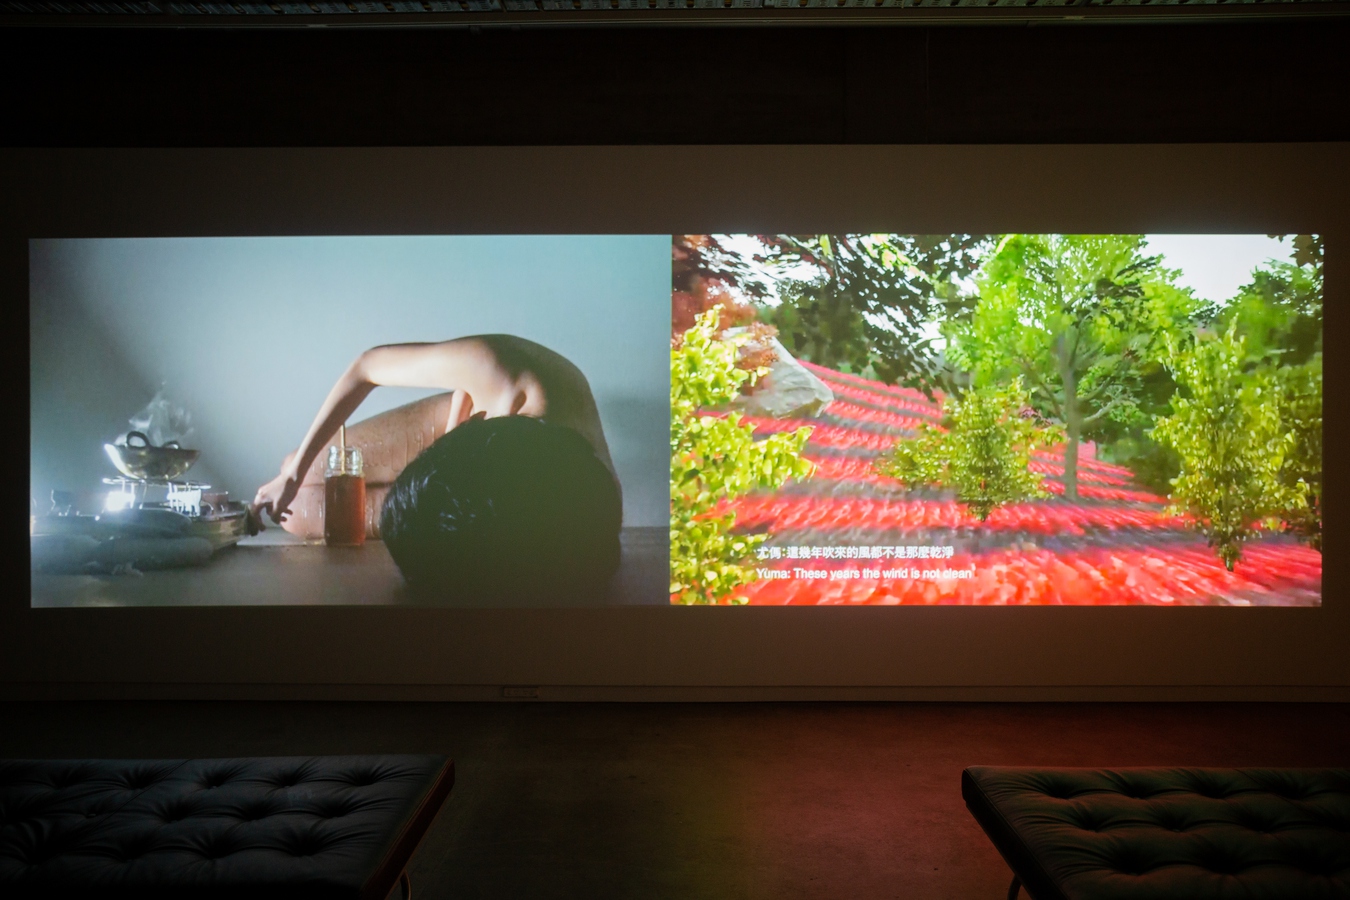 Image: Anchi Lin (Ciwas Tahos), Perhaps she comes from/to__Alang (installation view), 2021. Photo by Amy Weng.